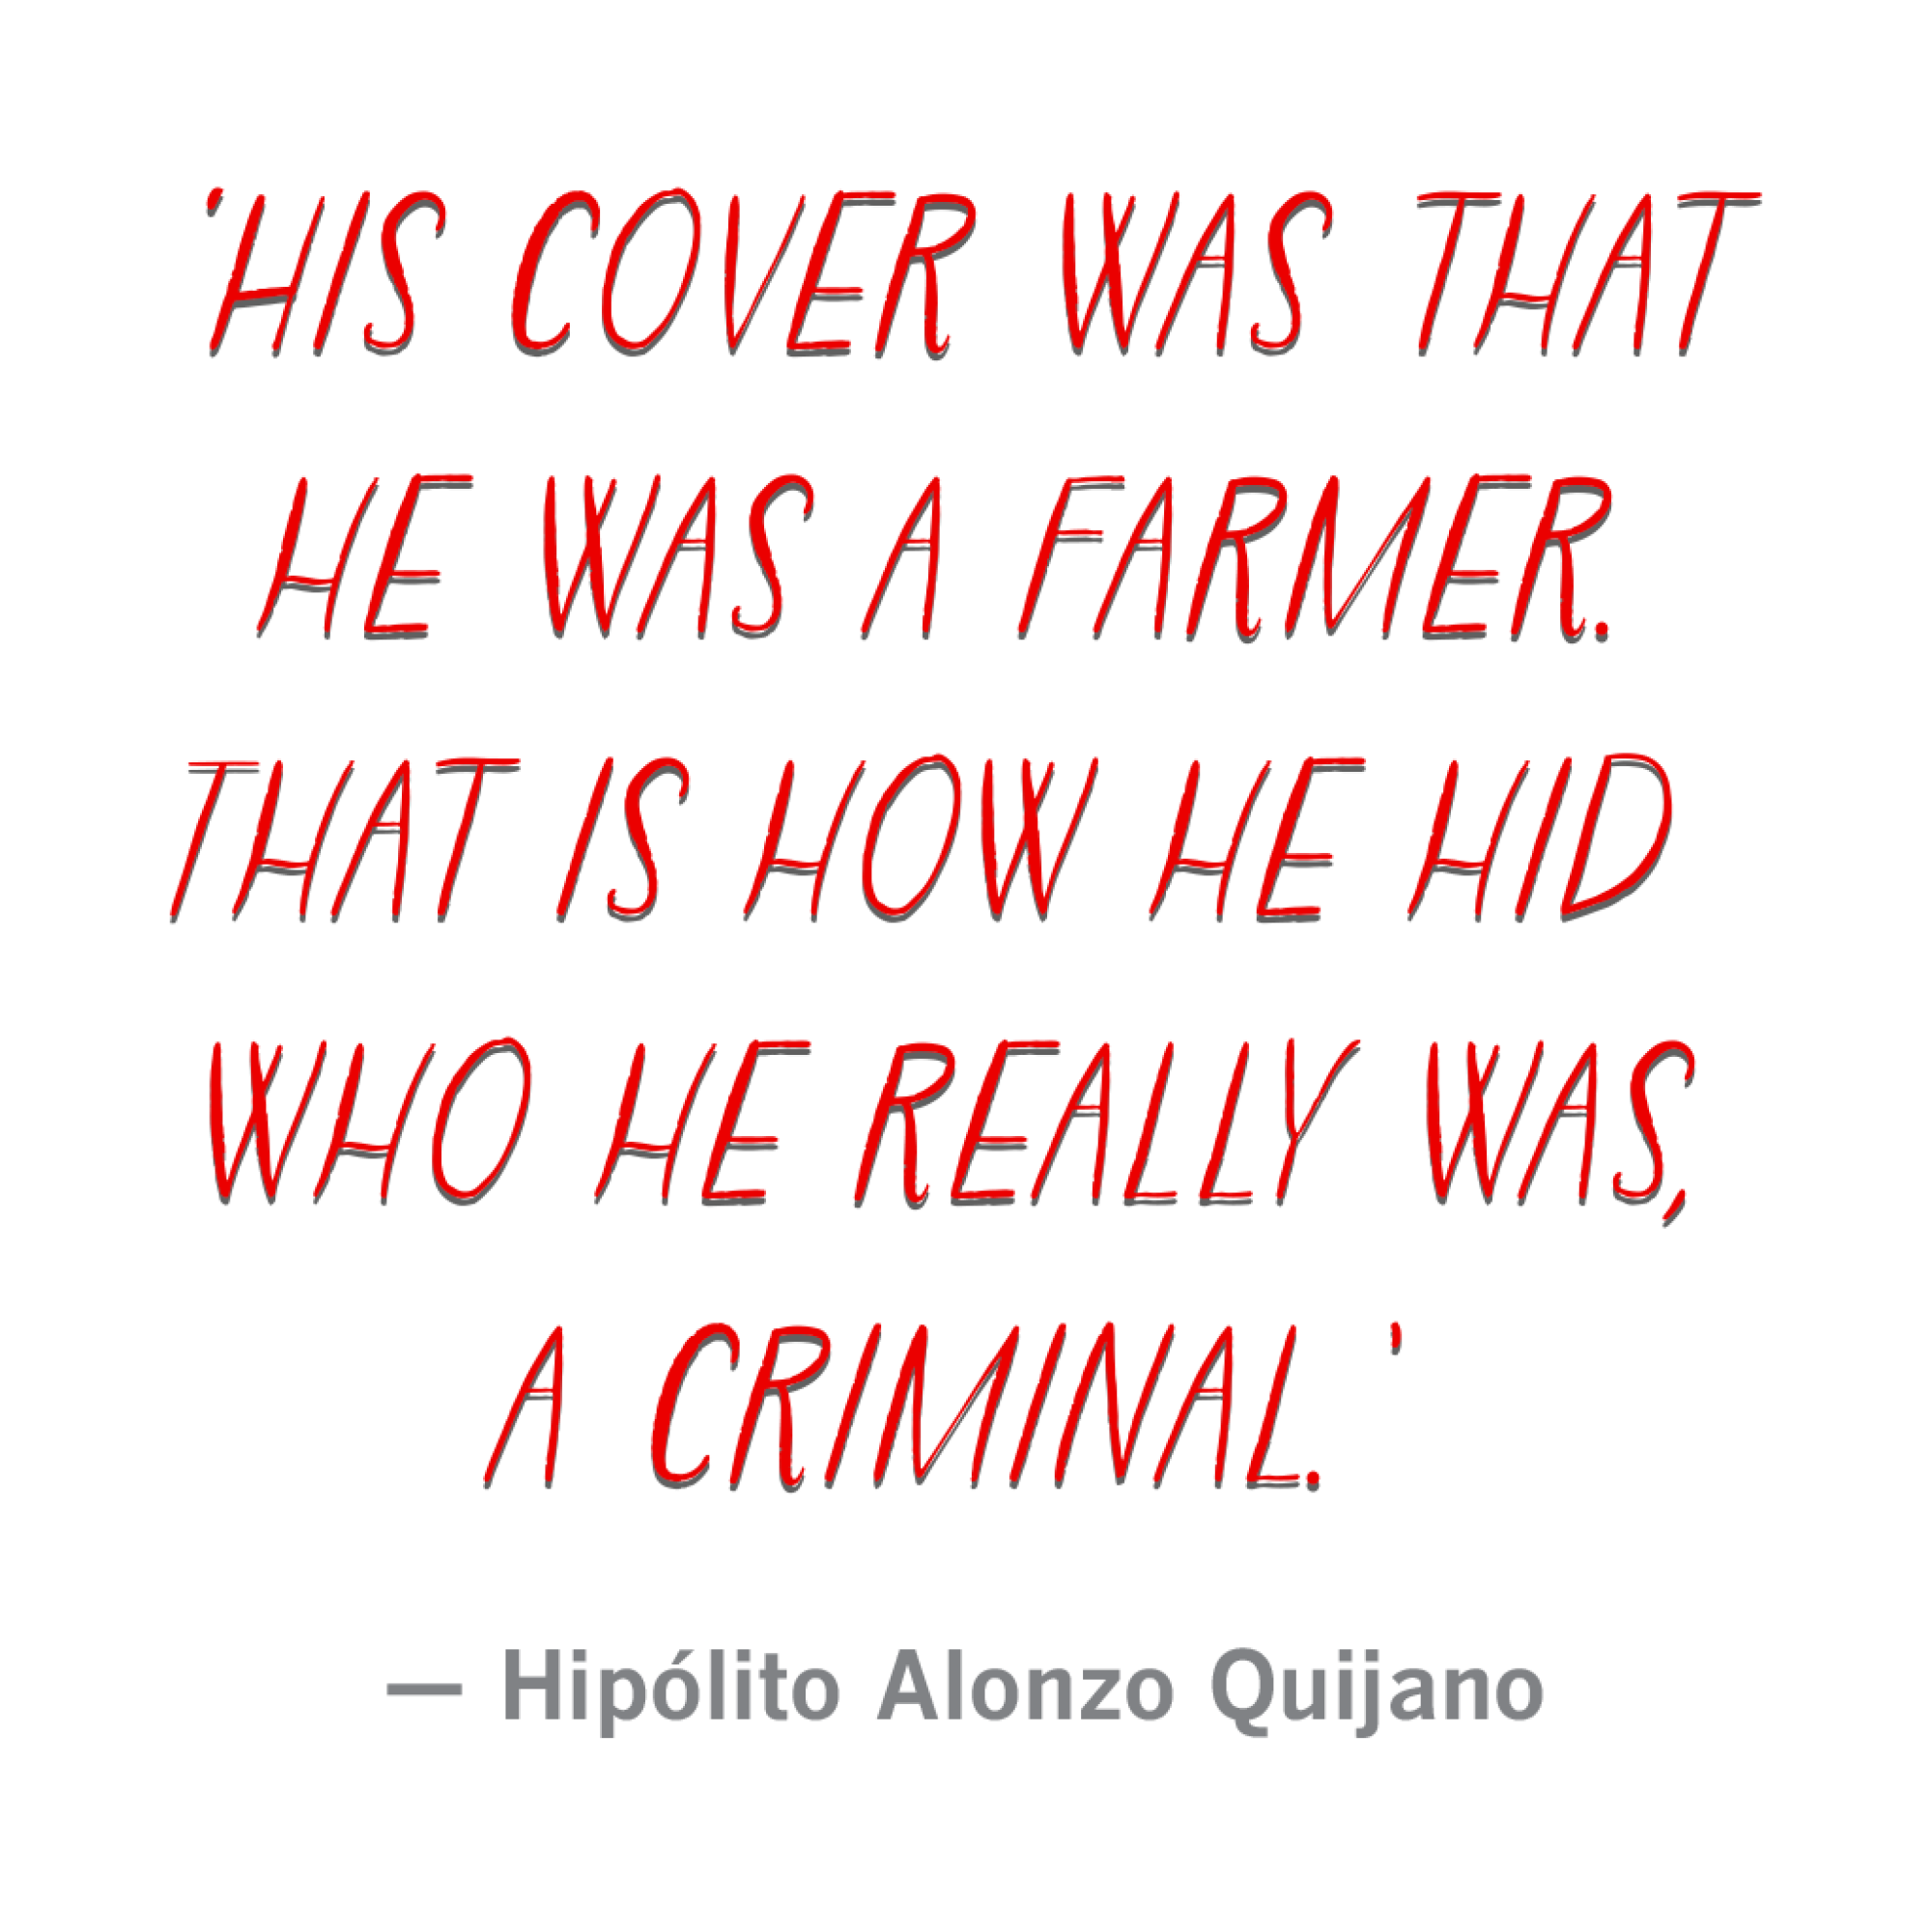 "His cover was thathe was a farmer.That is how he hid who he really was,a criminal."